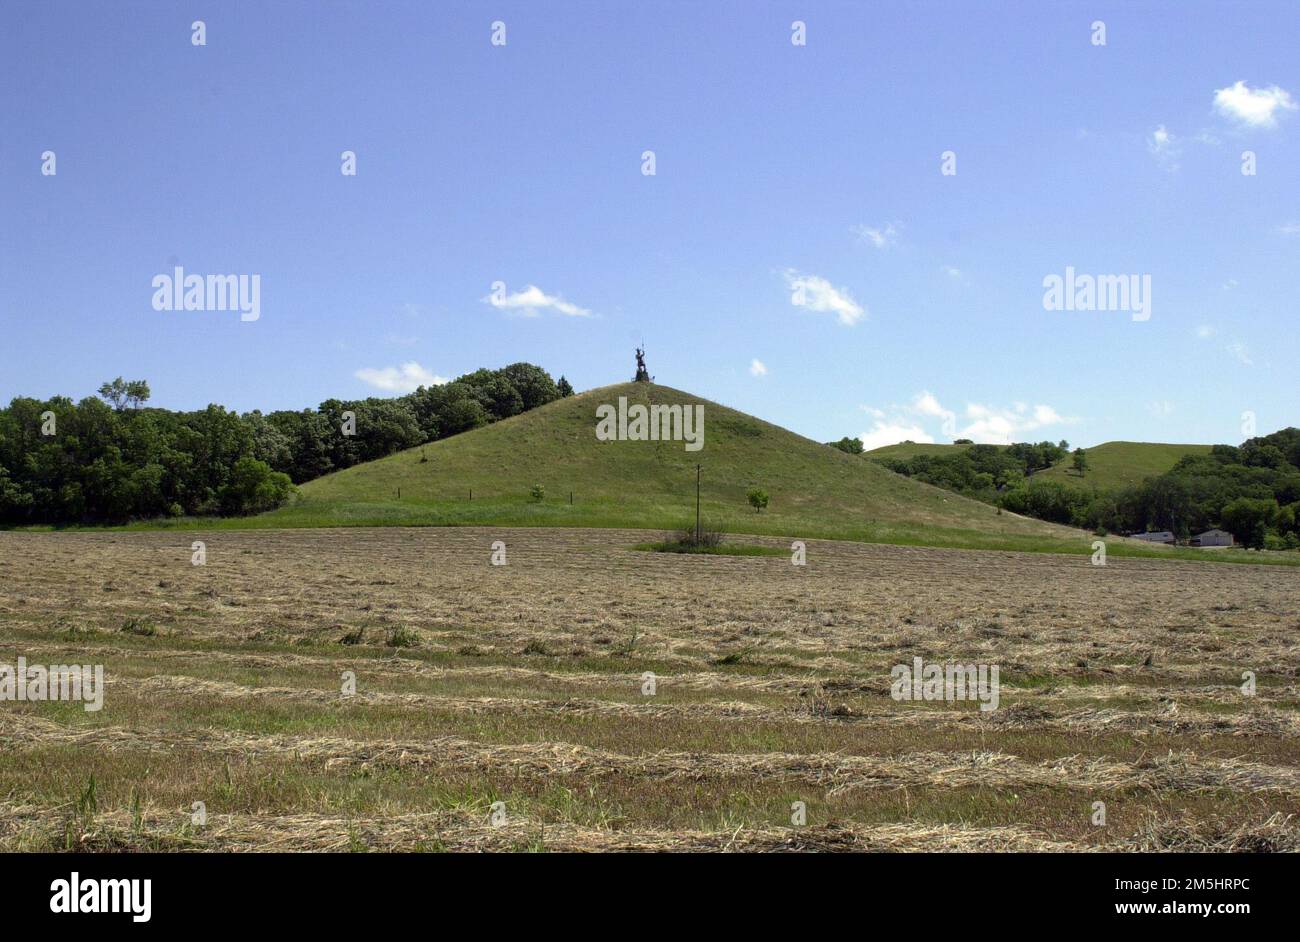 Sheyenne River Valley Scenic Byway - Pyramid Hill. The distinctive shape of Pyramid Hill lends credence to the legends about its hiding the remains of an ancient civilization. Location: Fort Ransom State Park, North Dakota (46.520° N 97.938° W) Stock Photo